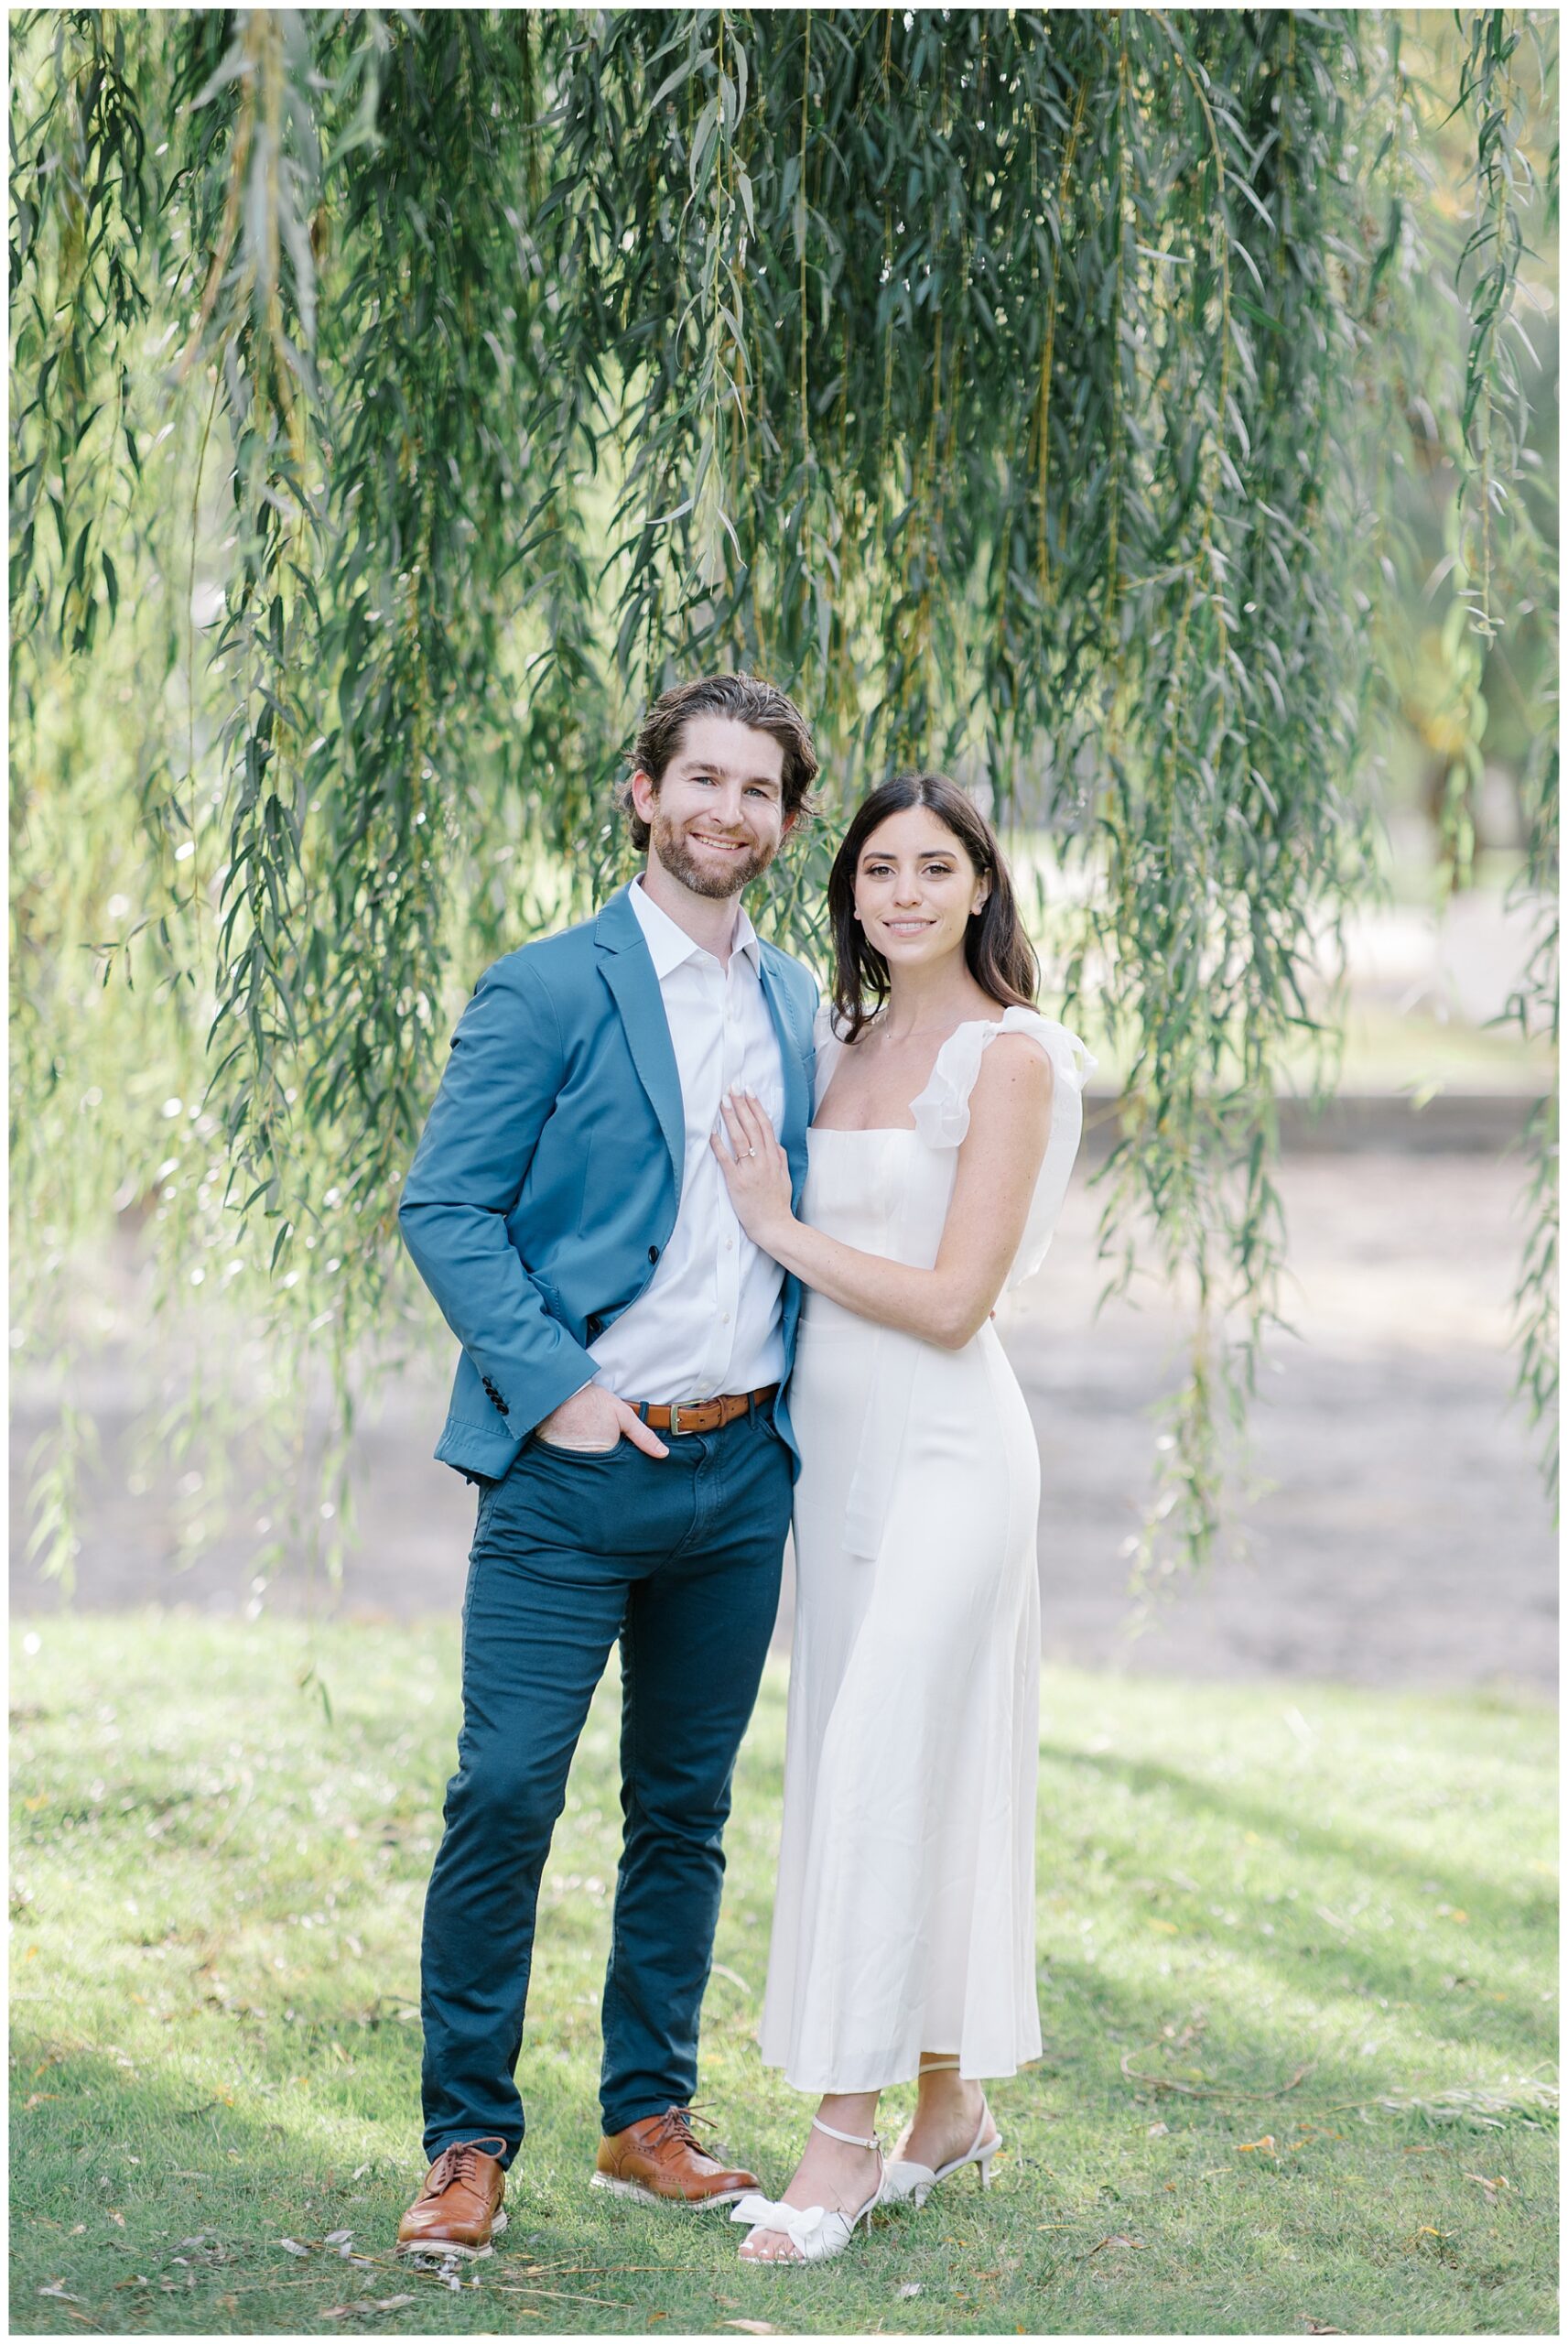 couple under weeping willow tree